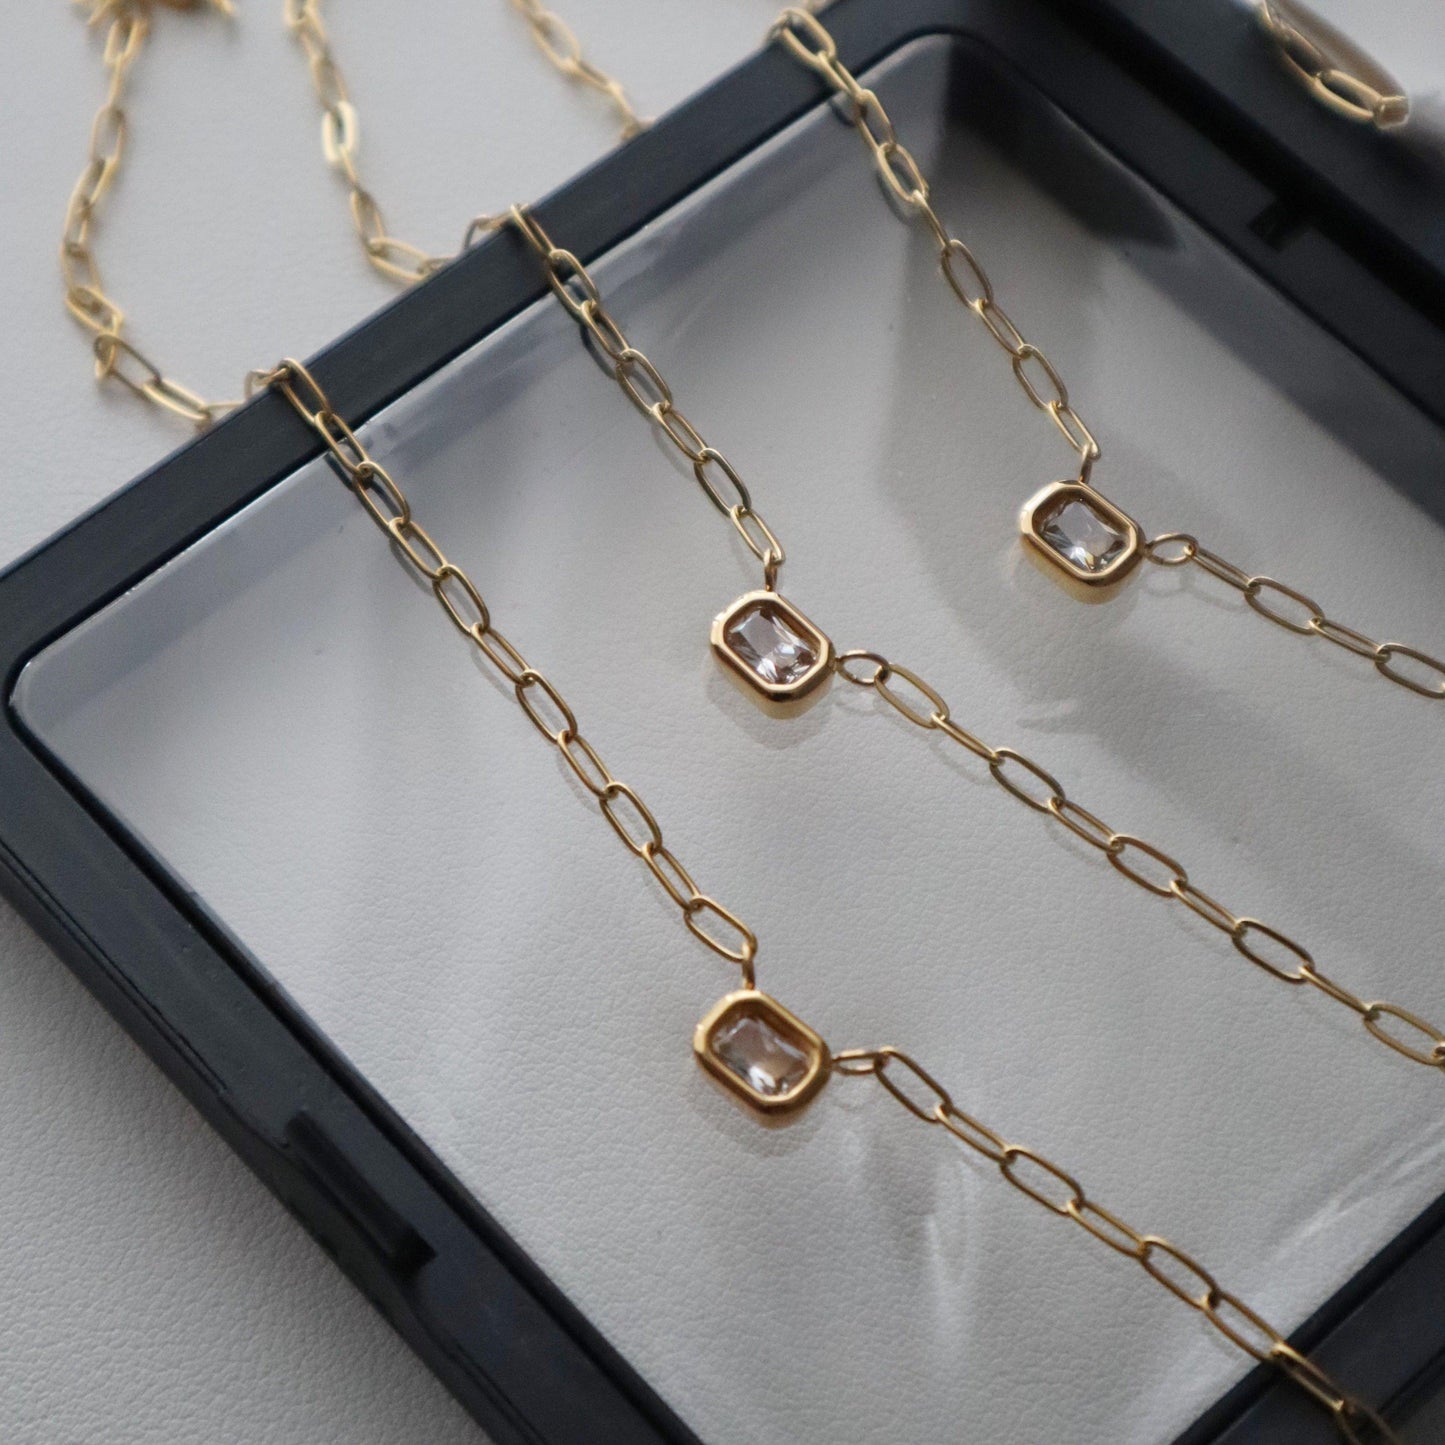 Rectangular Gem Necklace | Paperclip Pendant Necklace - JESSA JEWELRY | GOLD JEWELRY; dainty, affordable gold everyday jewelry. Tarnish free, water-resistant, hypoallergenic. Jewelry for everyday wear